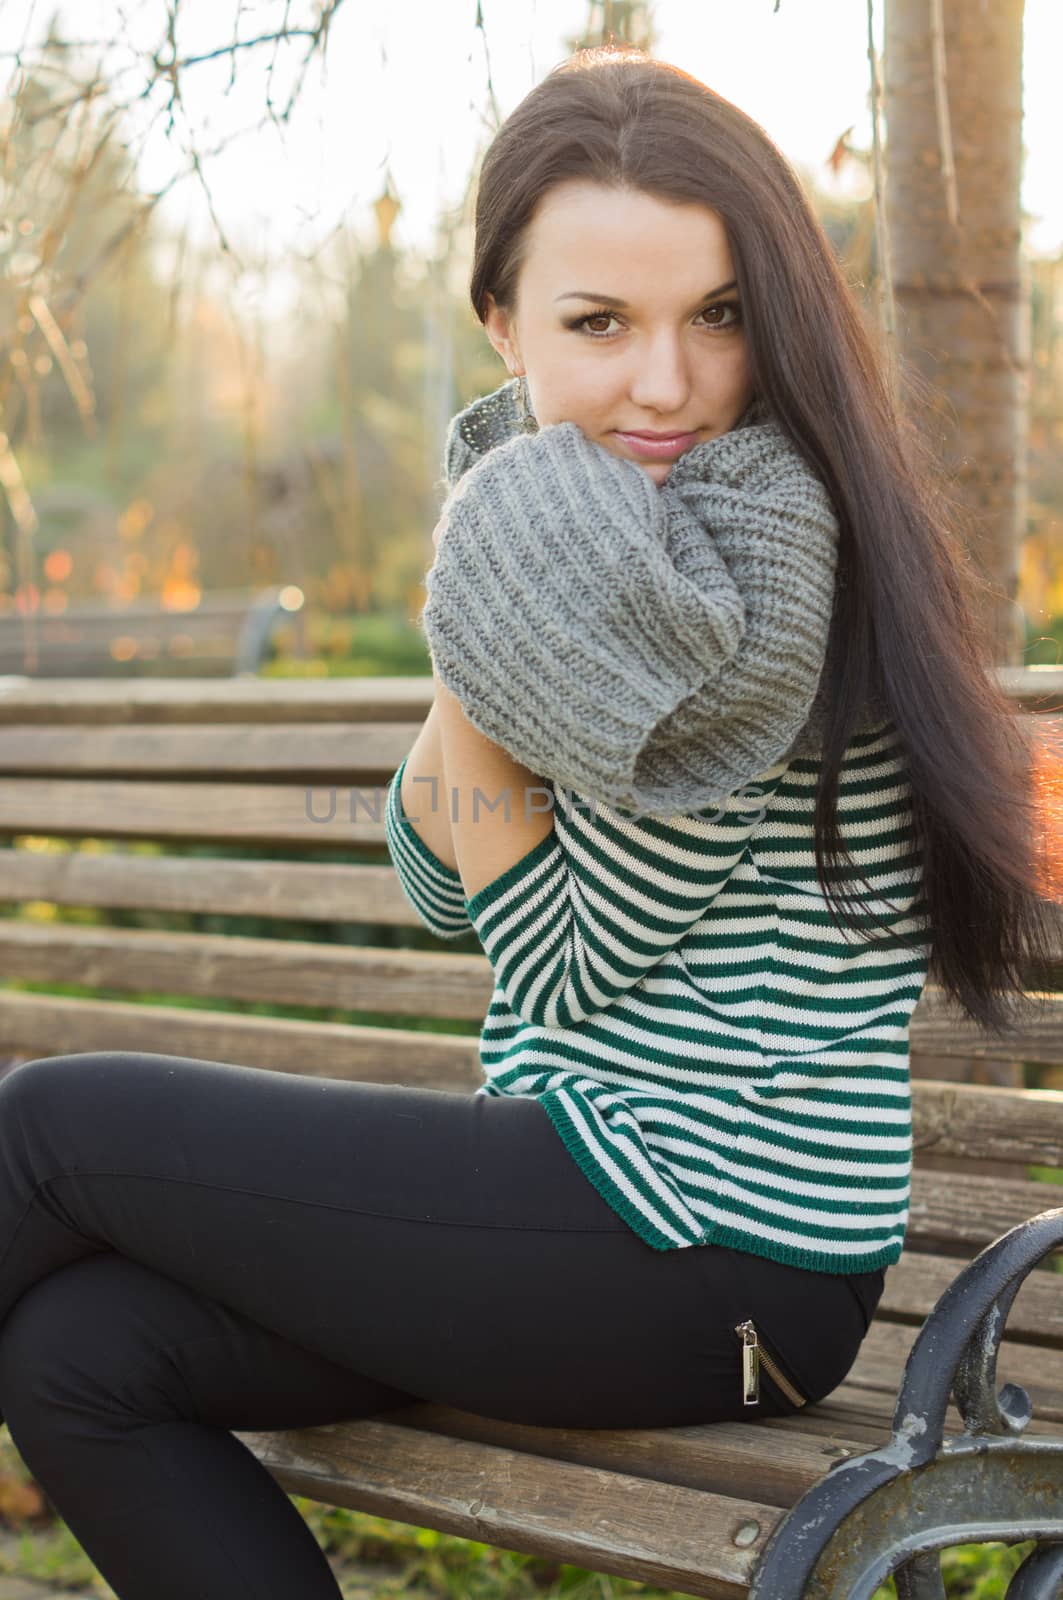 beautiful and sexy girl sitting on bench outdoors. 